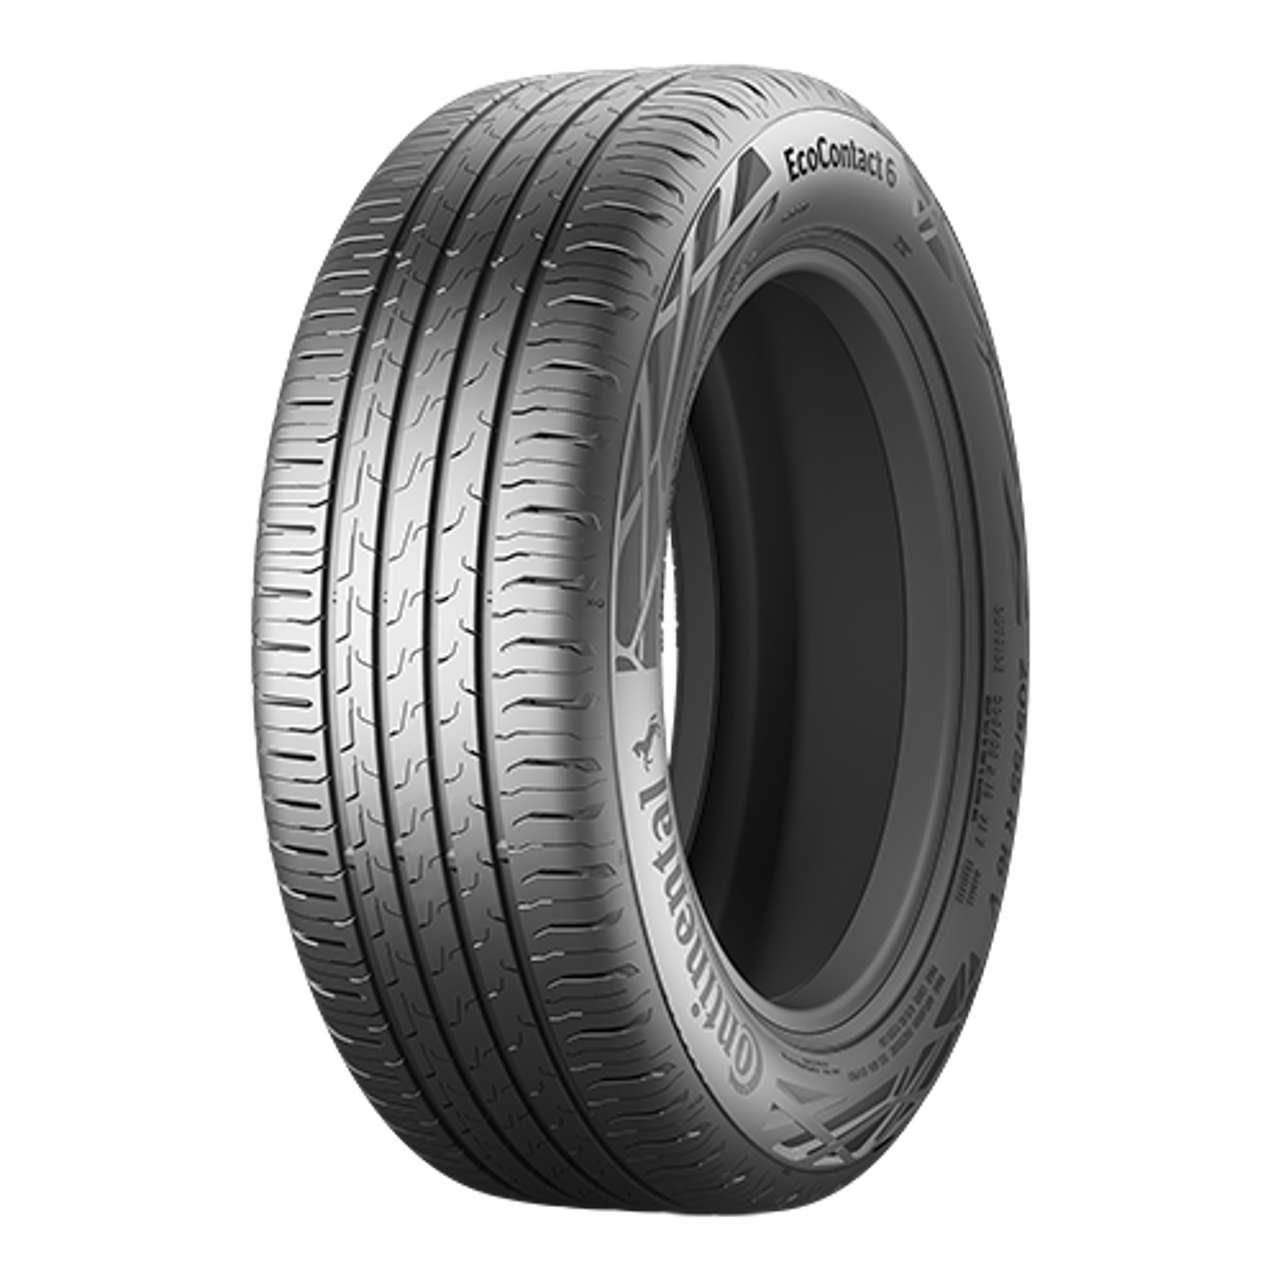 CONTINENTAL ECOCONTACT 6 (EVc) 215/55R17 98H